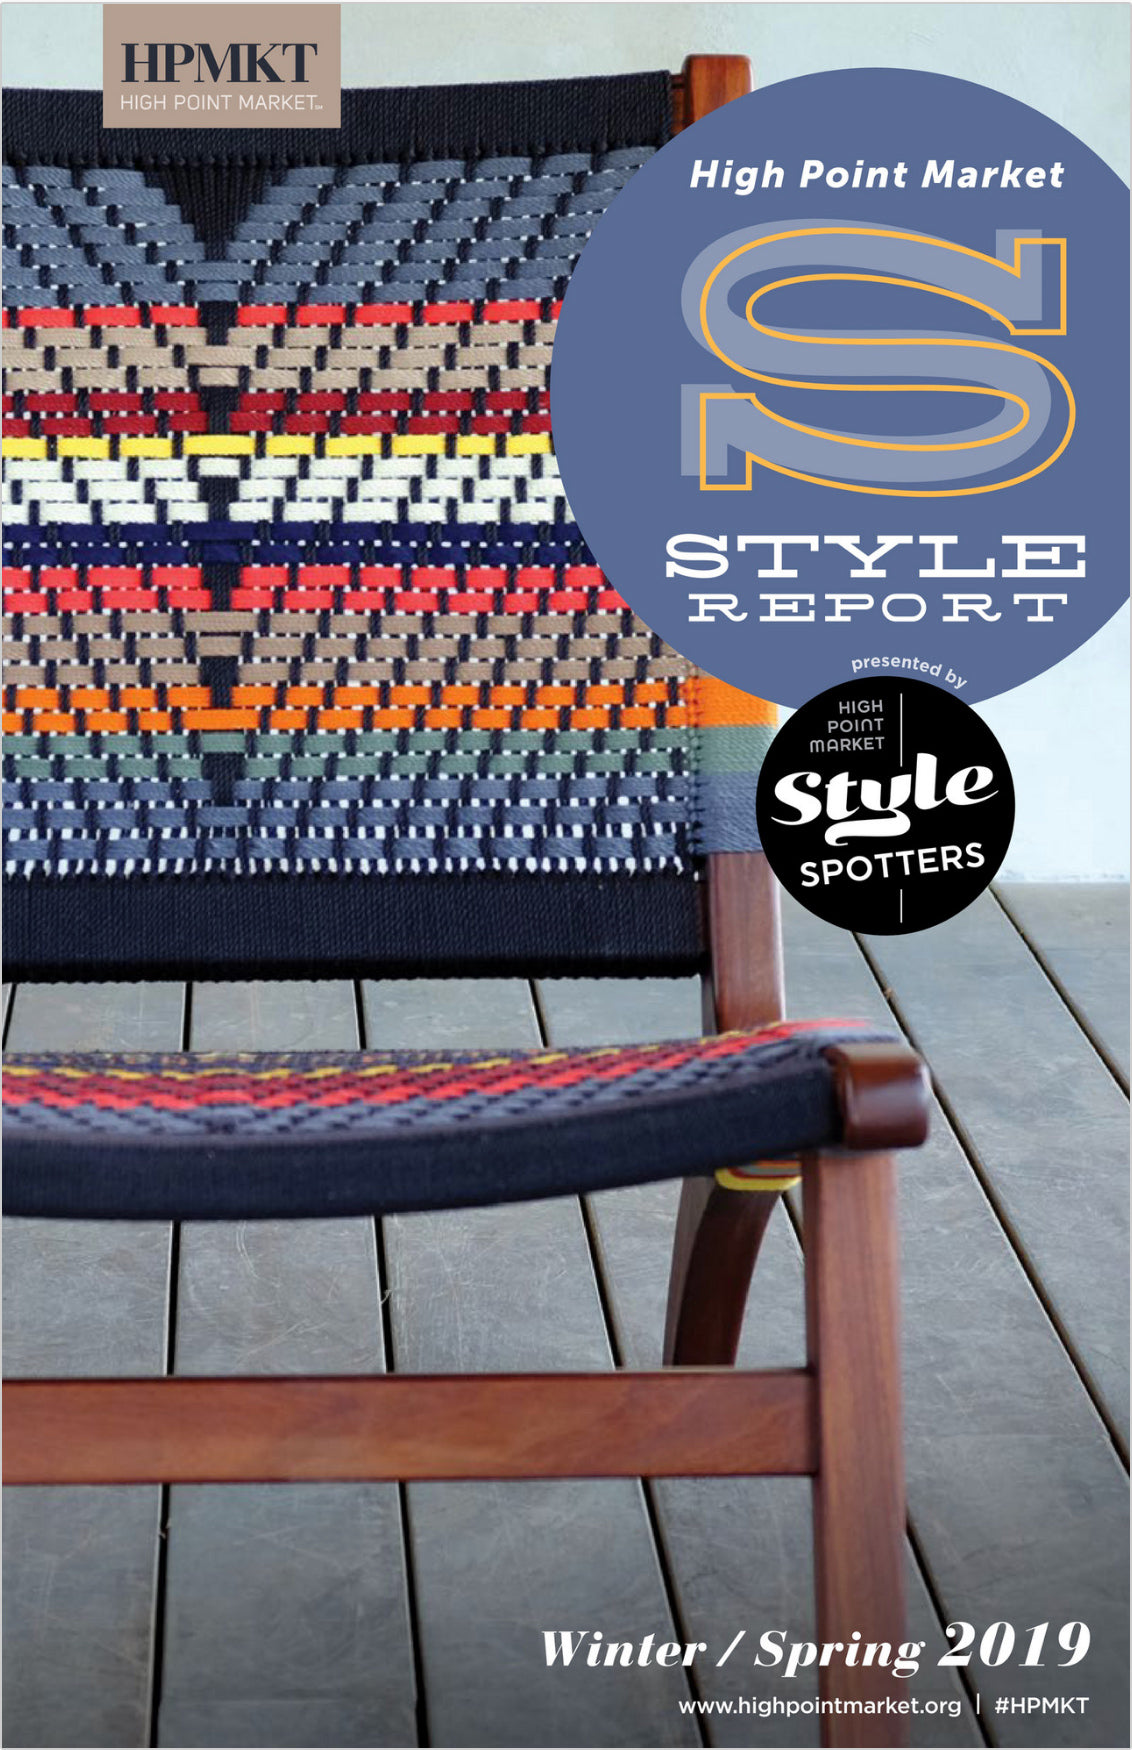 high point market style report magazine cover for spring 2019